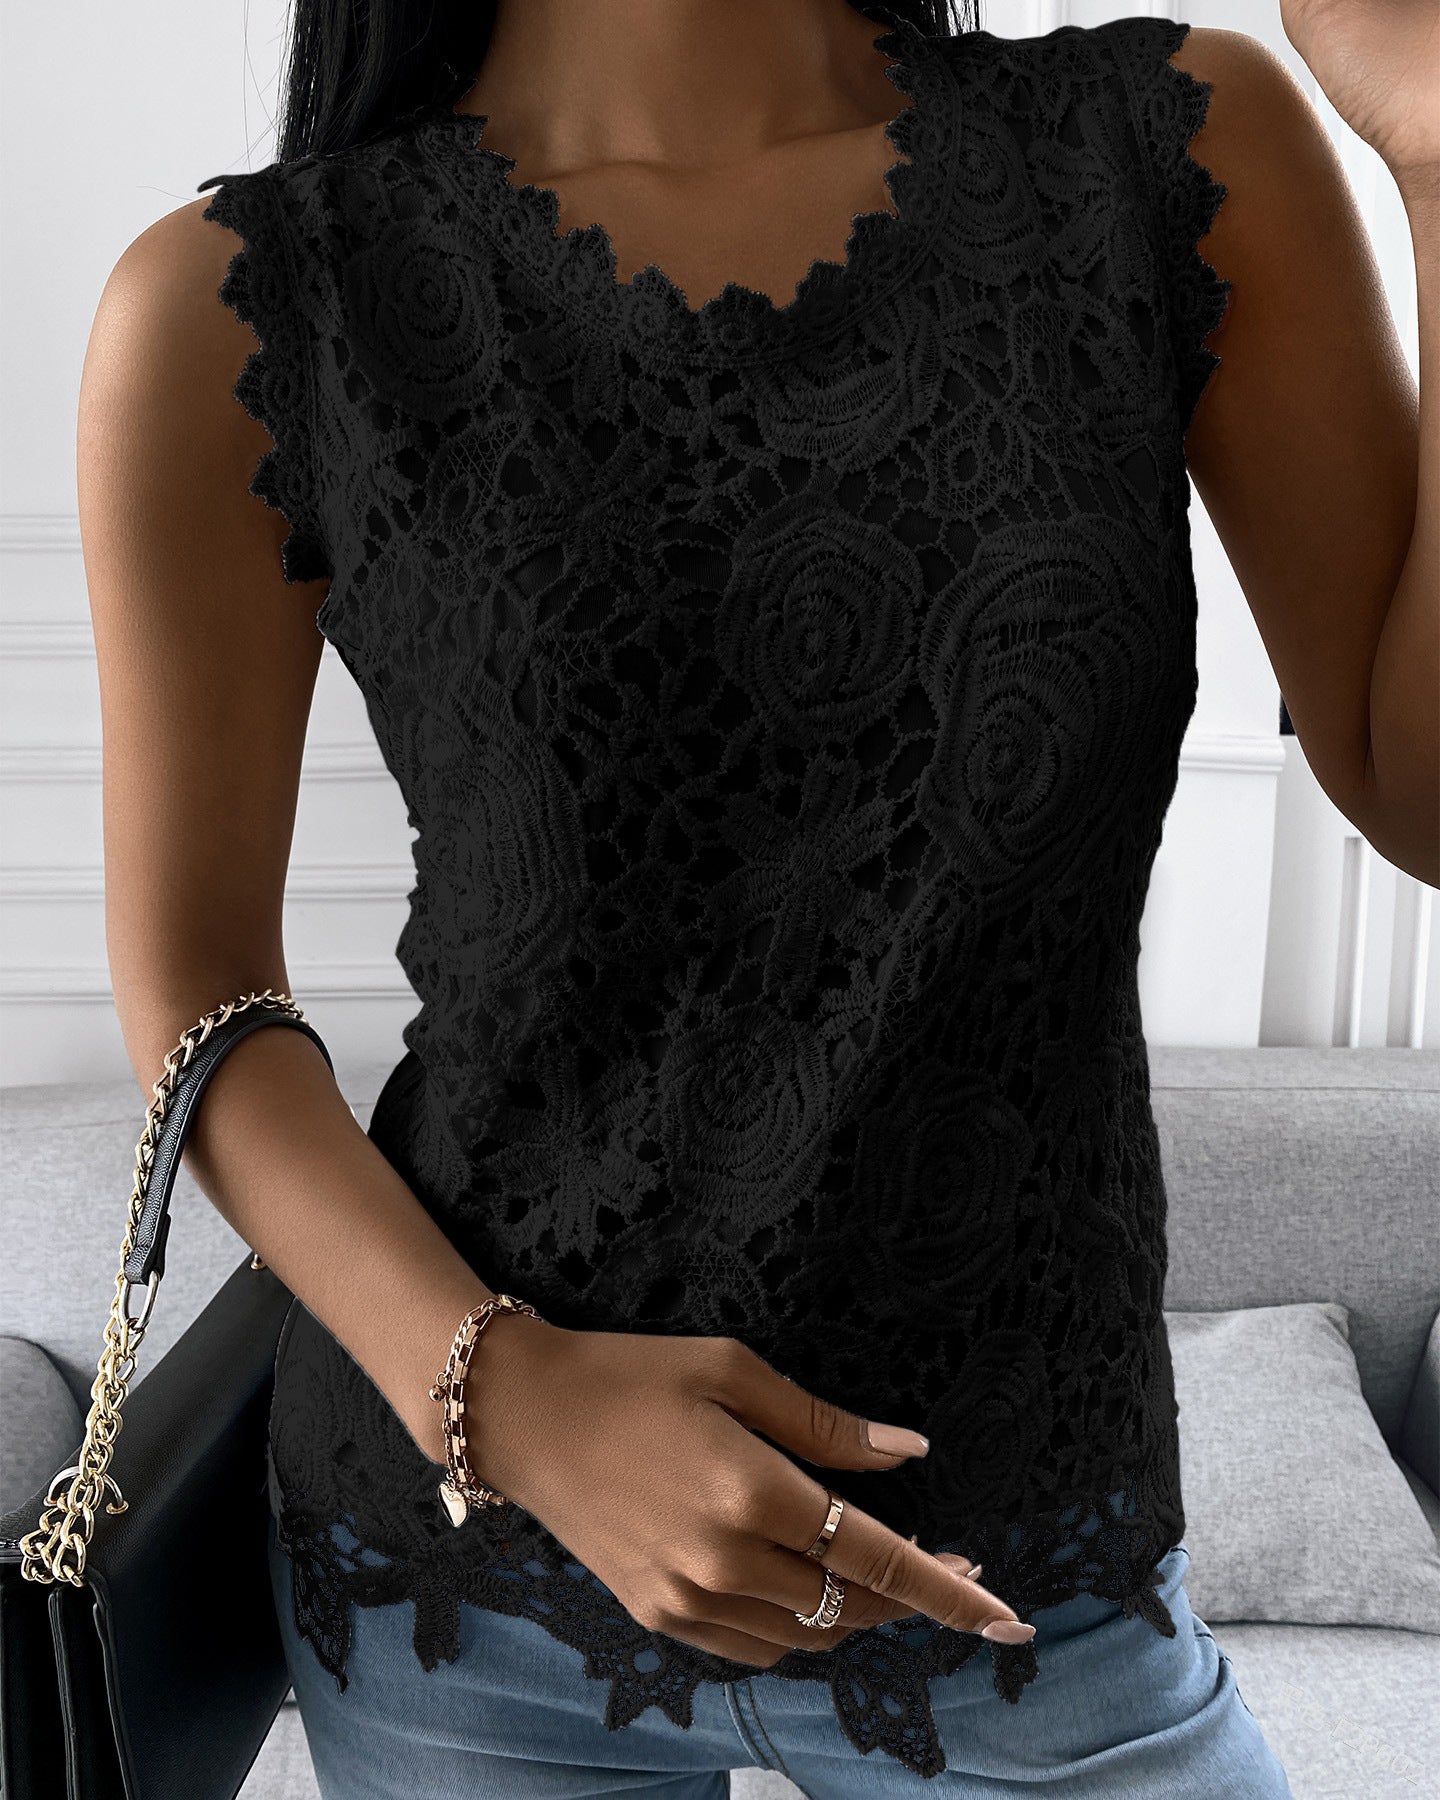 Sleeveless U-Neck Solid Color Lace T-Shirt: Casual Fashion for Women